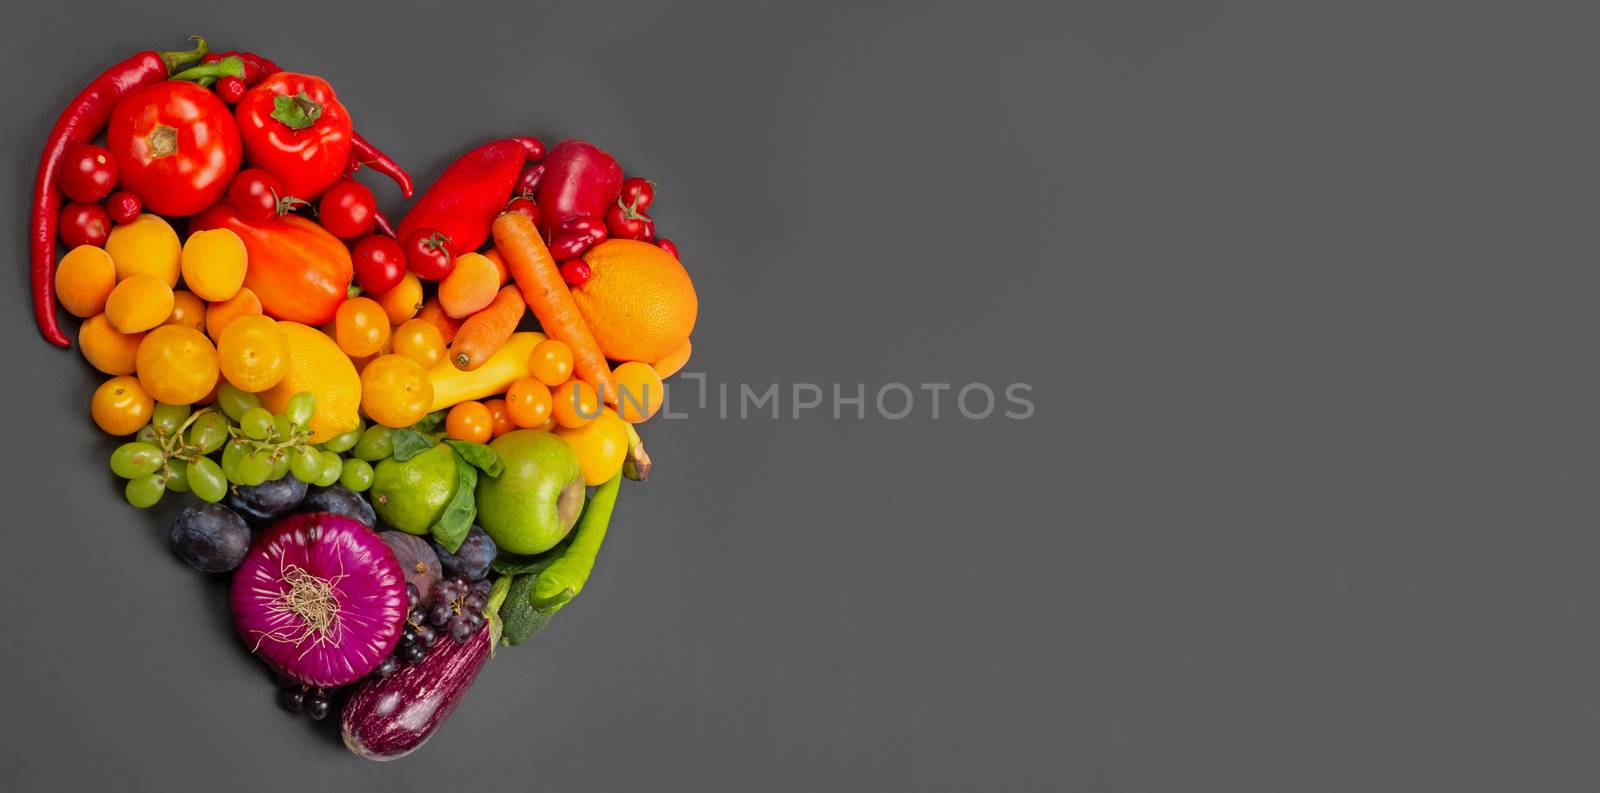 Rainbow heart of fruits and vegetables on gray background go vegetarian love healthy eating concept copy space for text